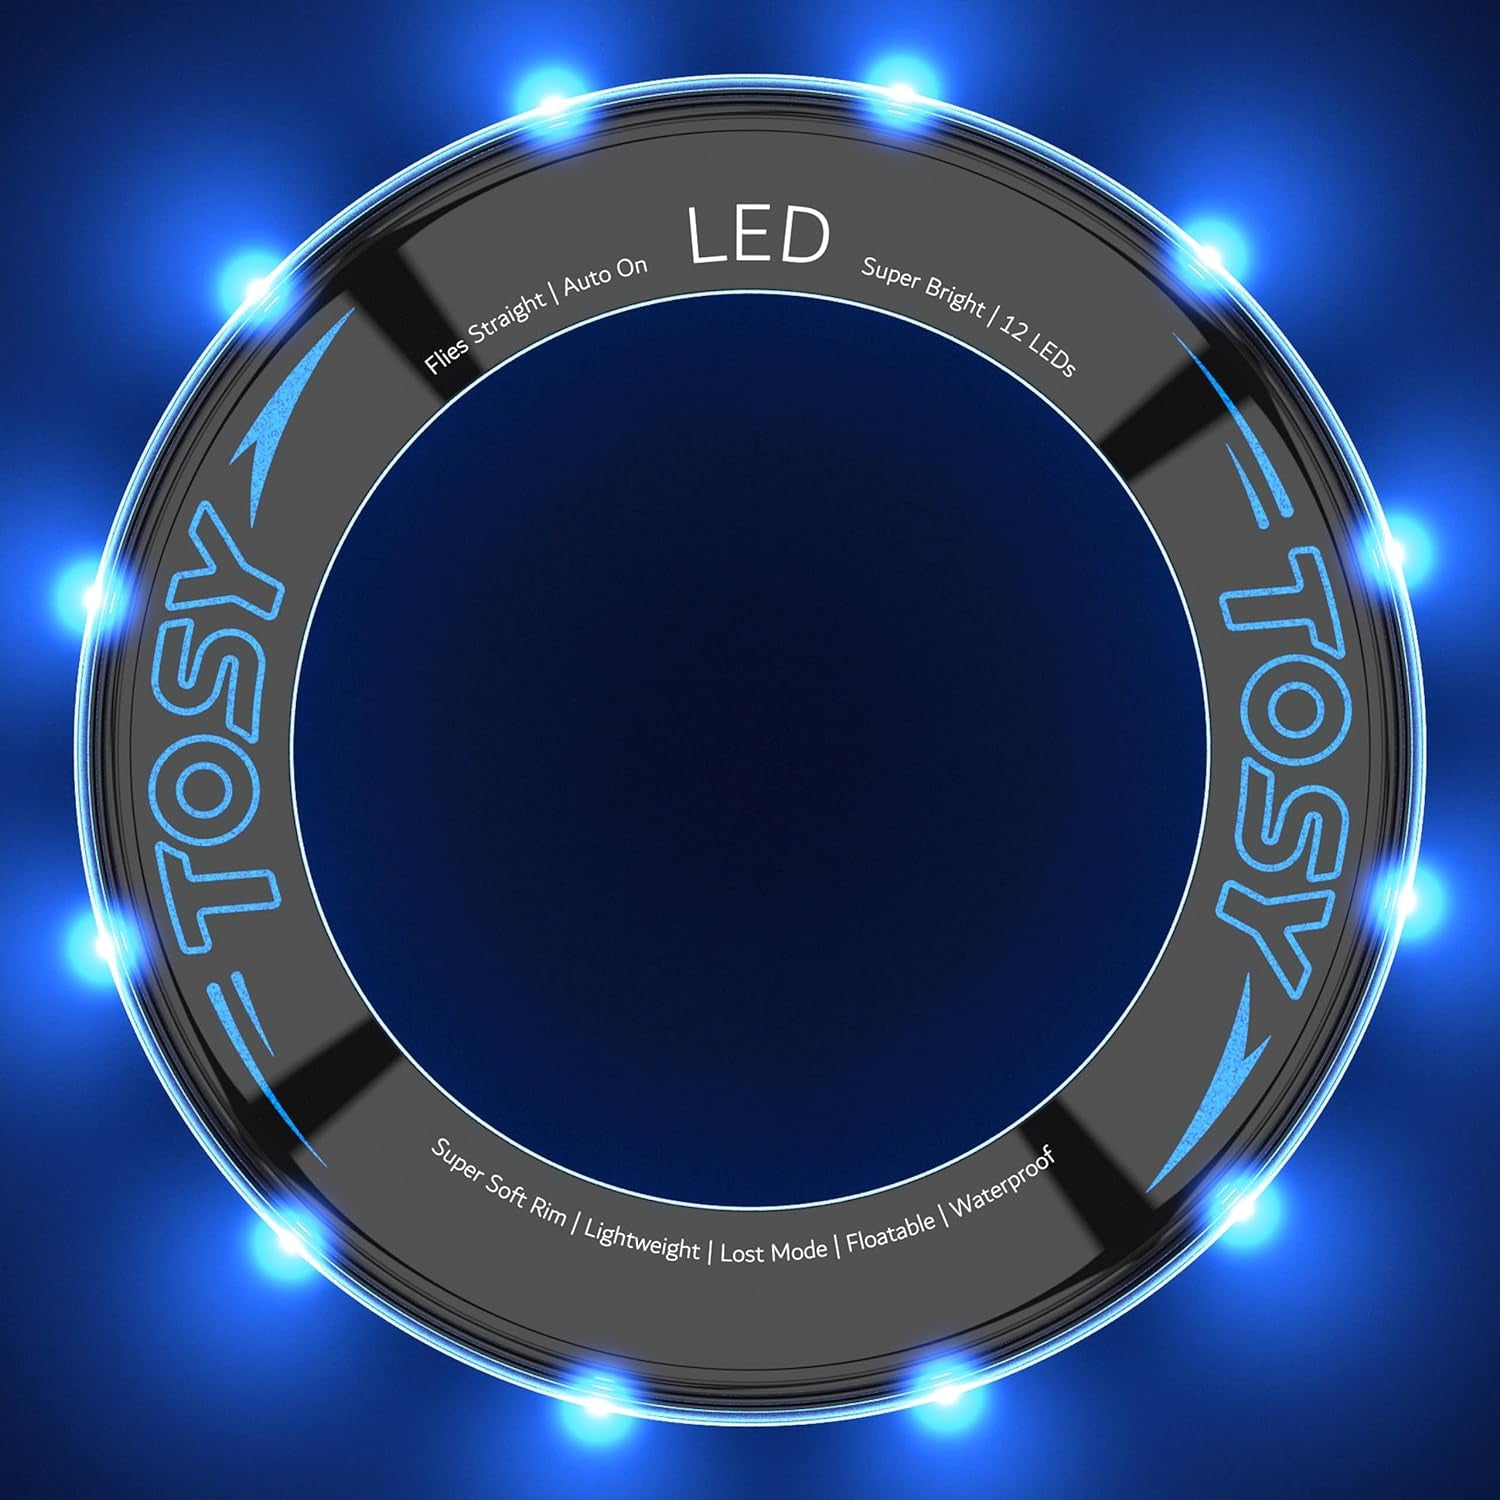 Flying Ring - 12 Leds, Super Bright, Soft, Auto Light Up, Safe, Waterproof, Lightweight Frisbee, Cool Birthday, Camping, Easter Basket Stuffers & Outdoor/Indoor Gift Toy for Boys/Girls/Kids